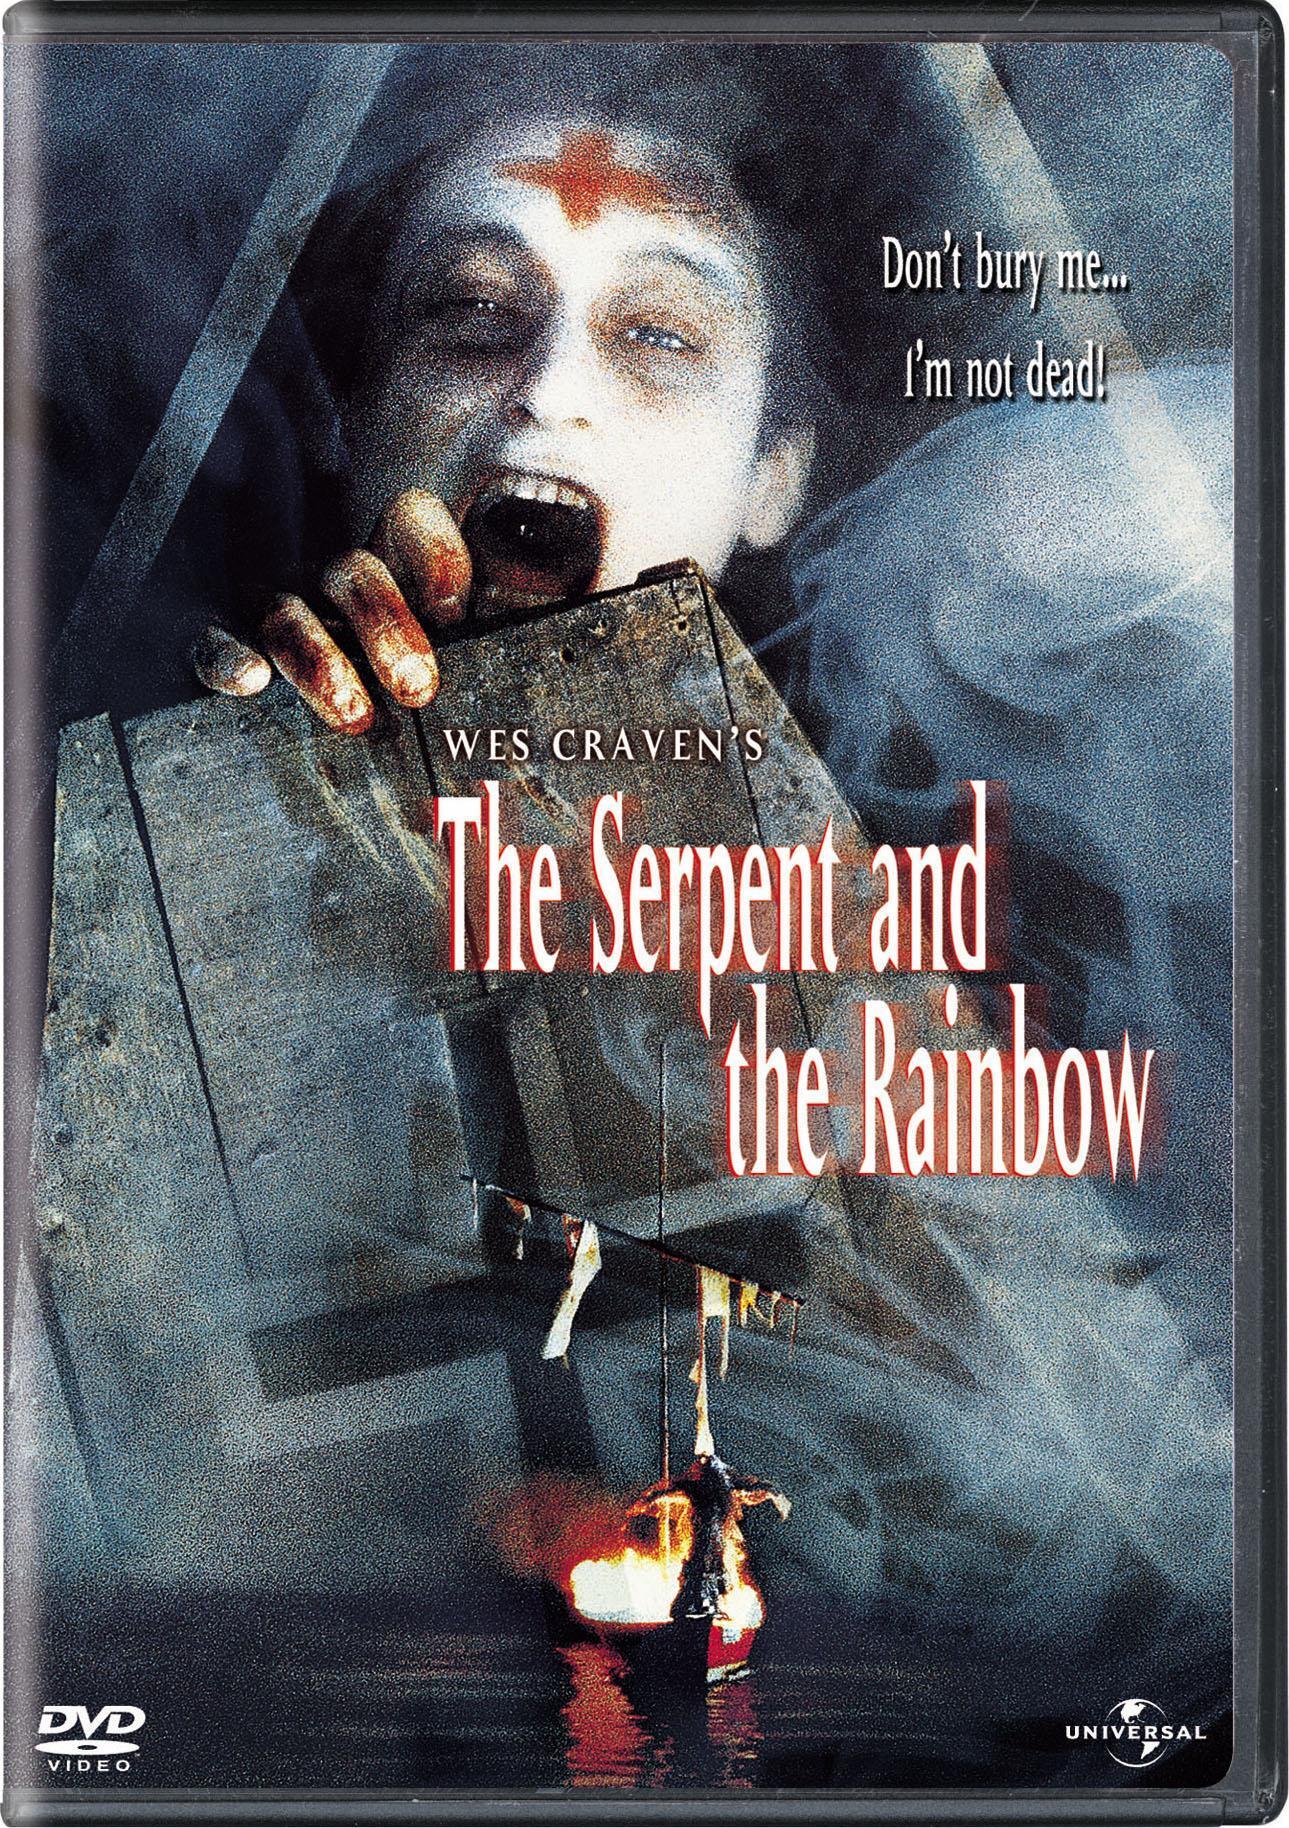 The Serpent And The Rainbow - DVD [ 1988 ]  - Horror Movies On DVD - Movies On GRUV